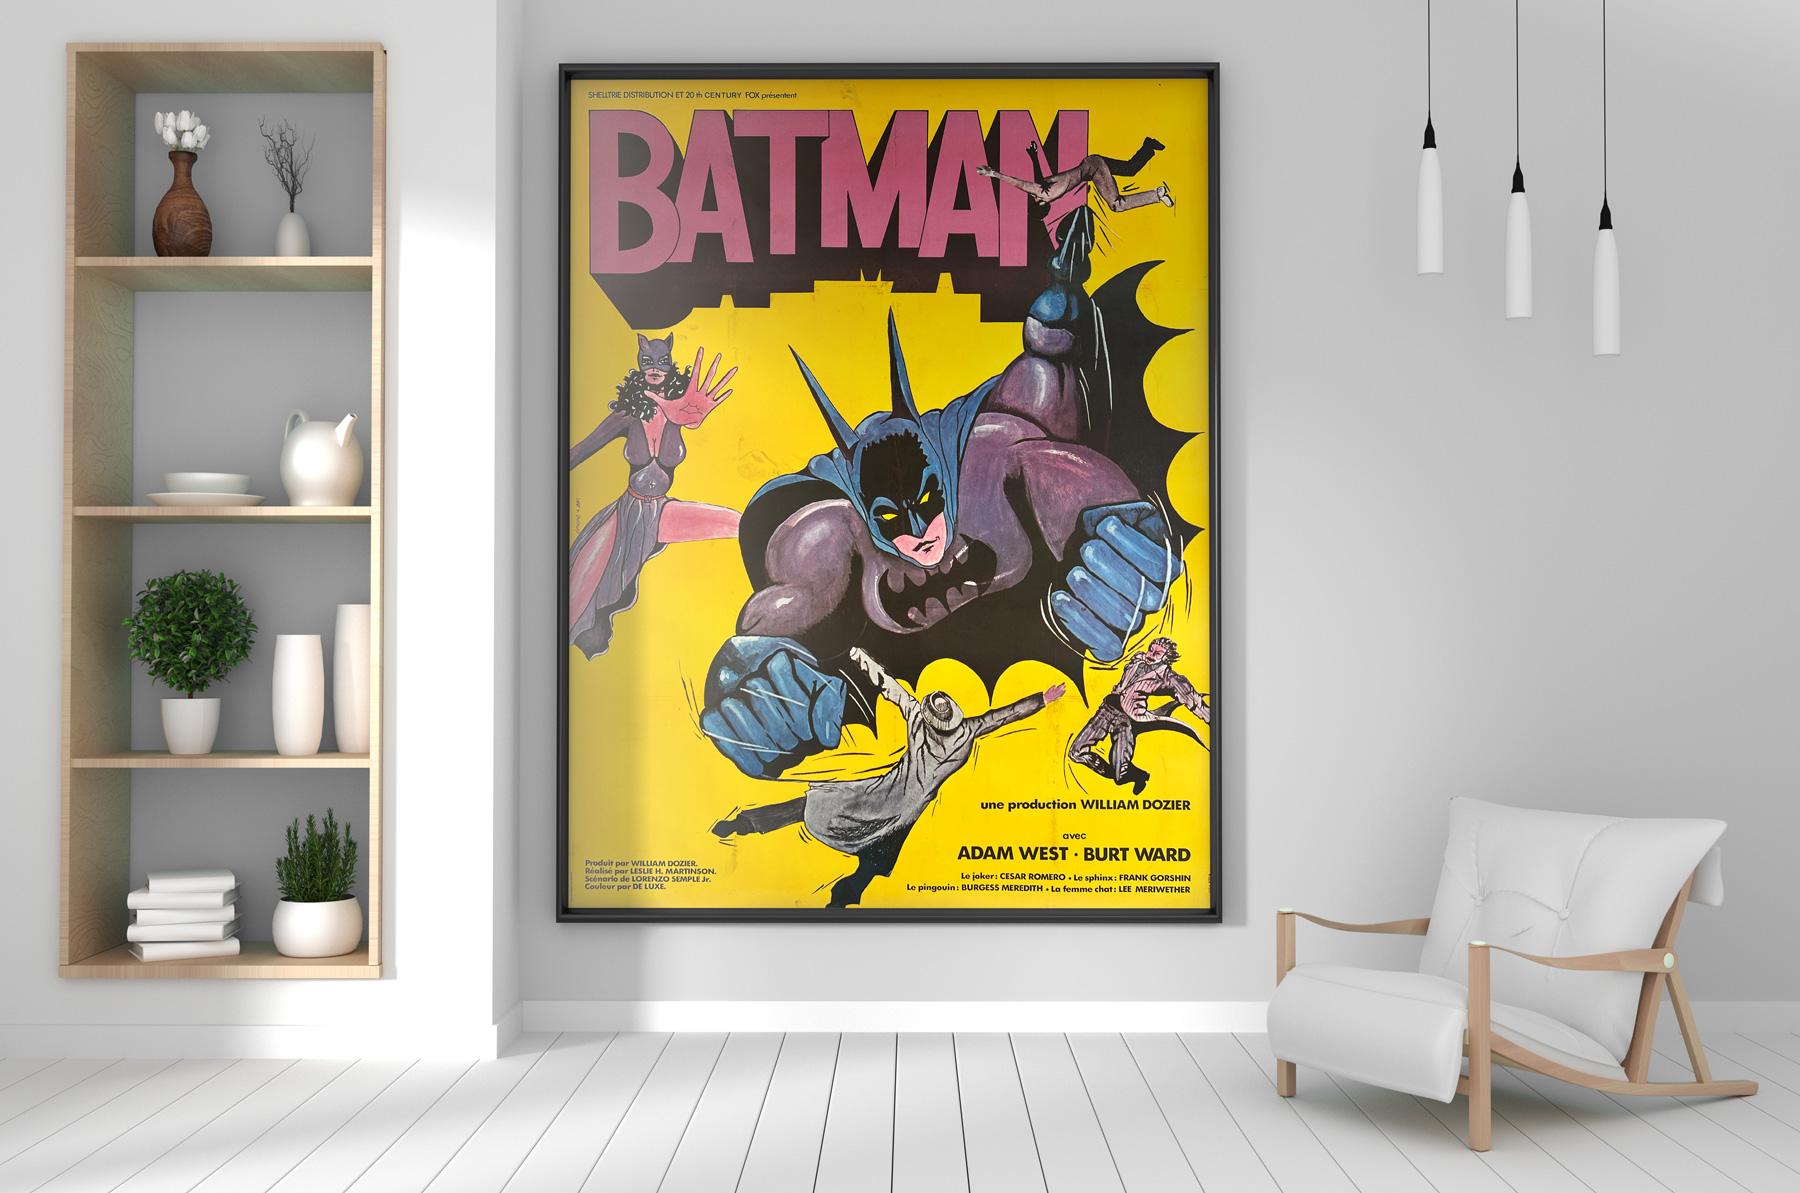 Fabulous original Batman re-release French film poster from early 1970s. Superb artwork and colors on a scale that packs a serious Kapow!

This original vintage move poster is sized 46 x 60 3/4 inches (48.5 x 64 inches including the